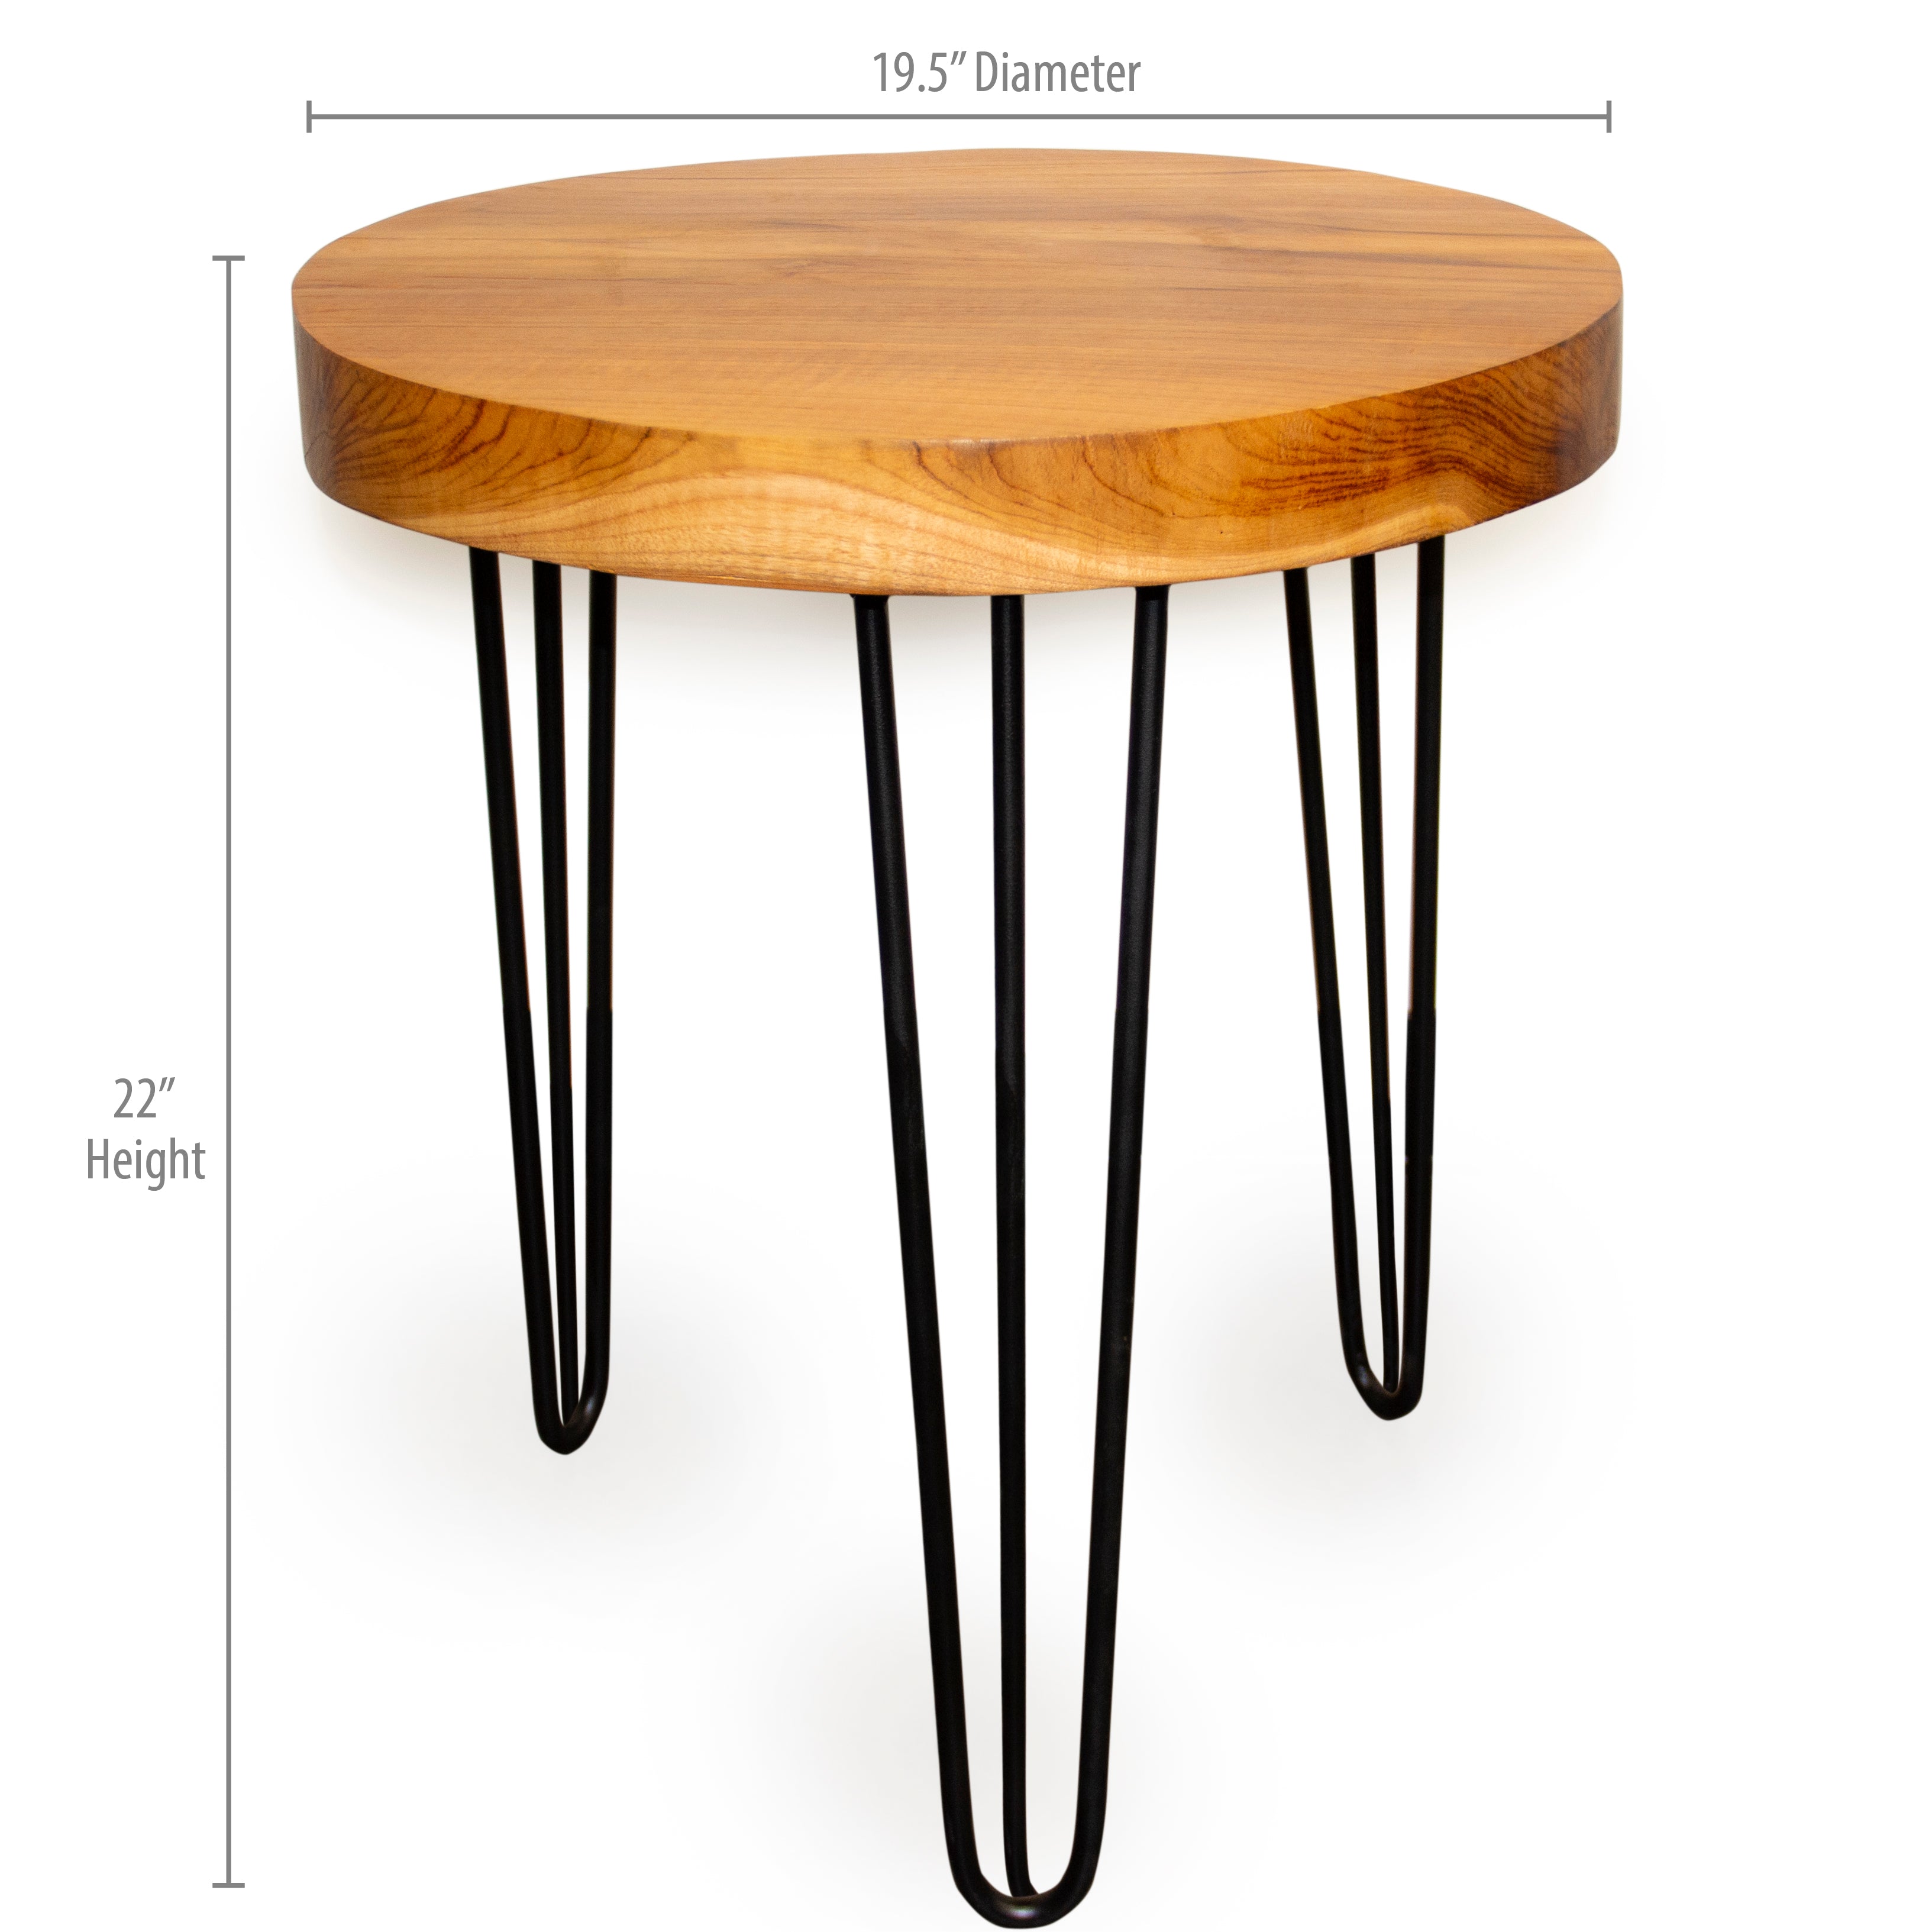 Indonesian Teak Wood Round Slab Accent Table dimensions